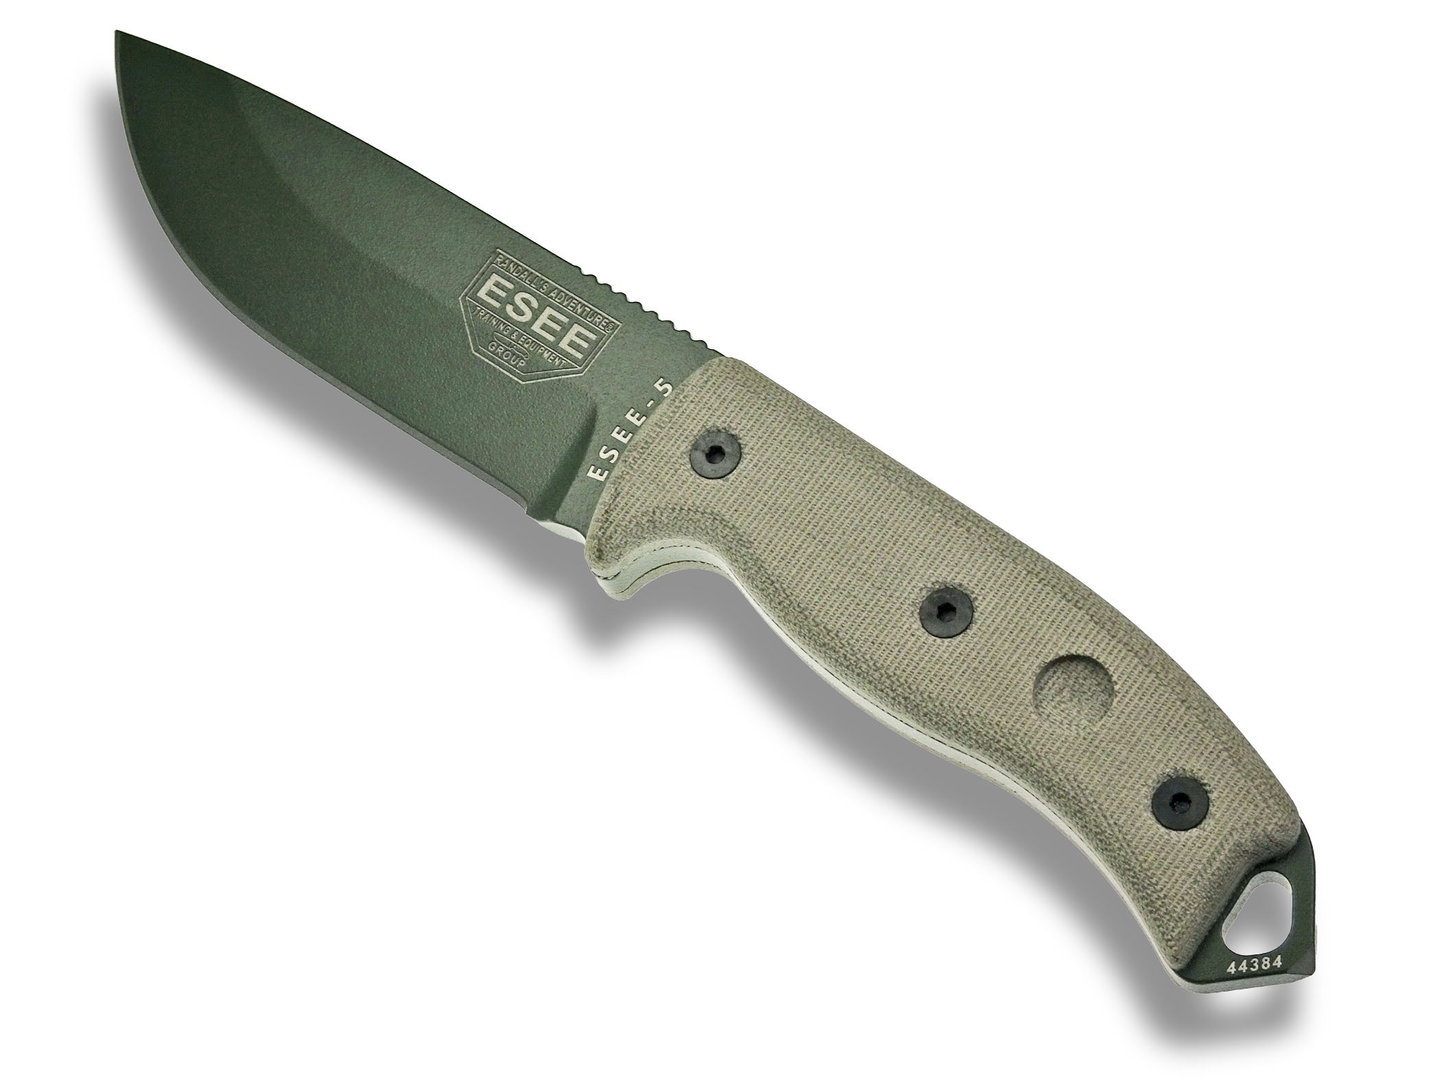 ESEE-5 olive drab without sheath